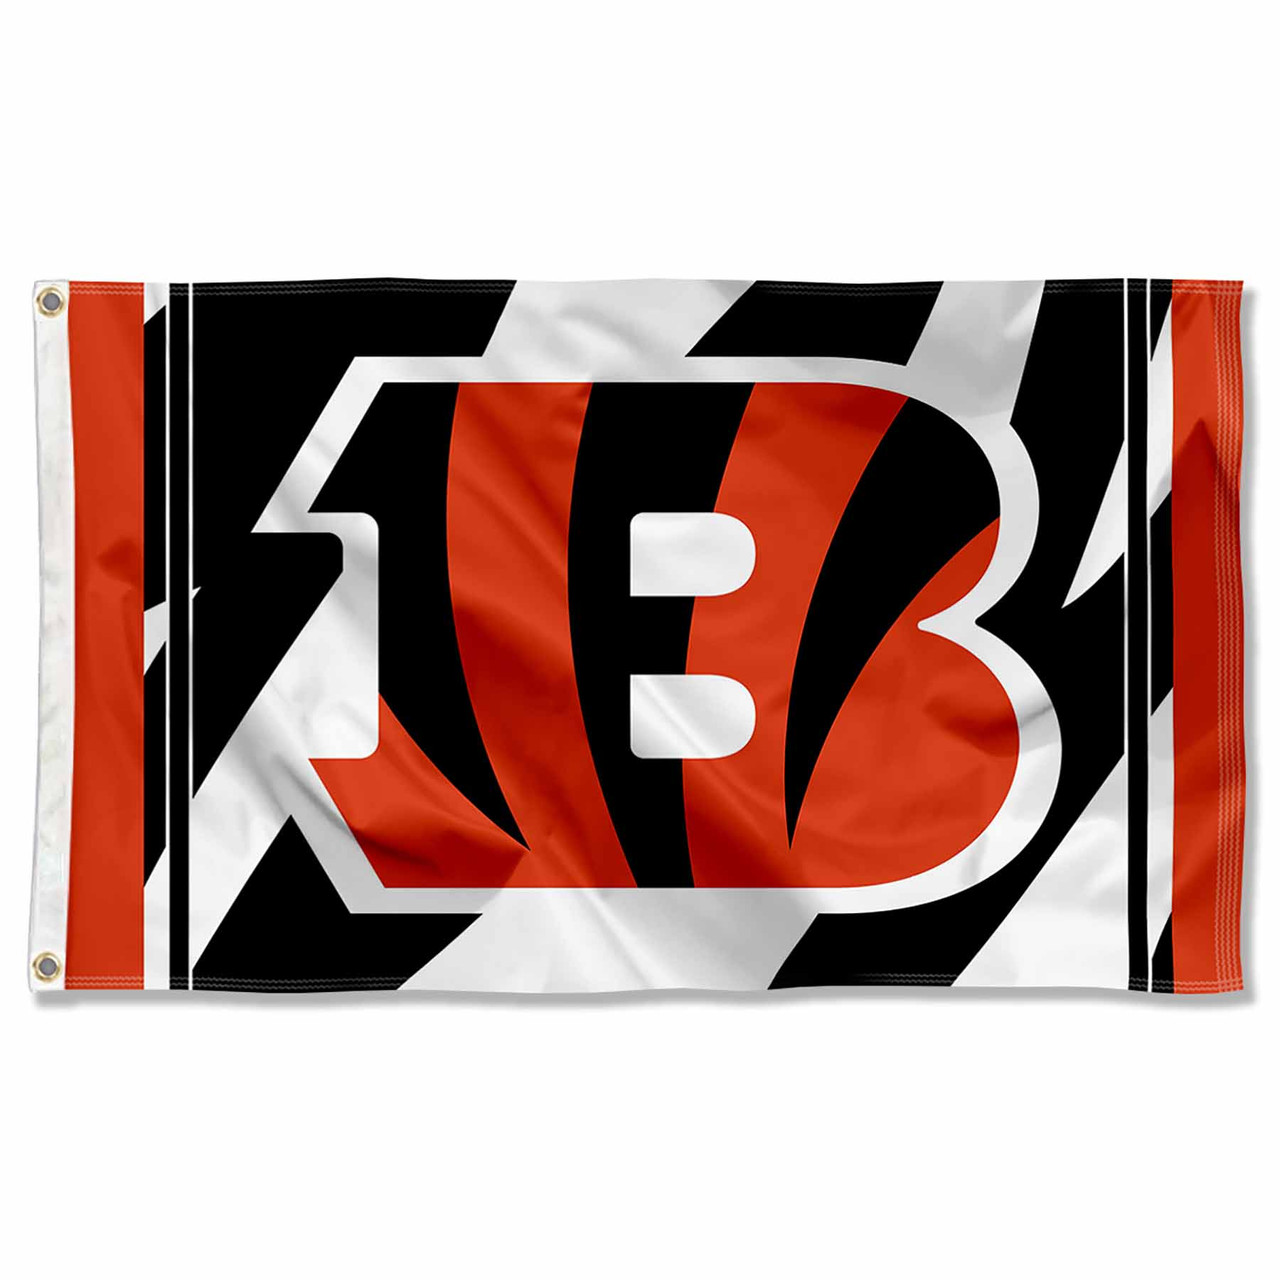 Cincinnati Bengals White Stripes 3x5 Banner Flag - State Street Products